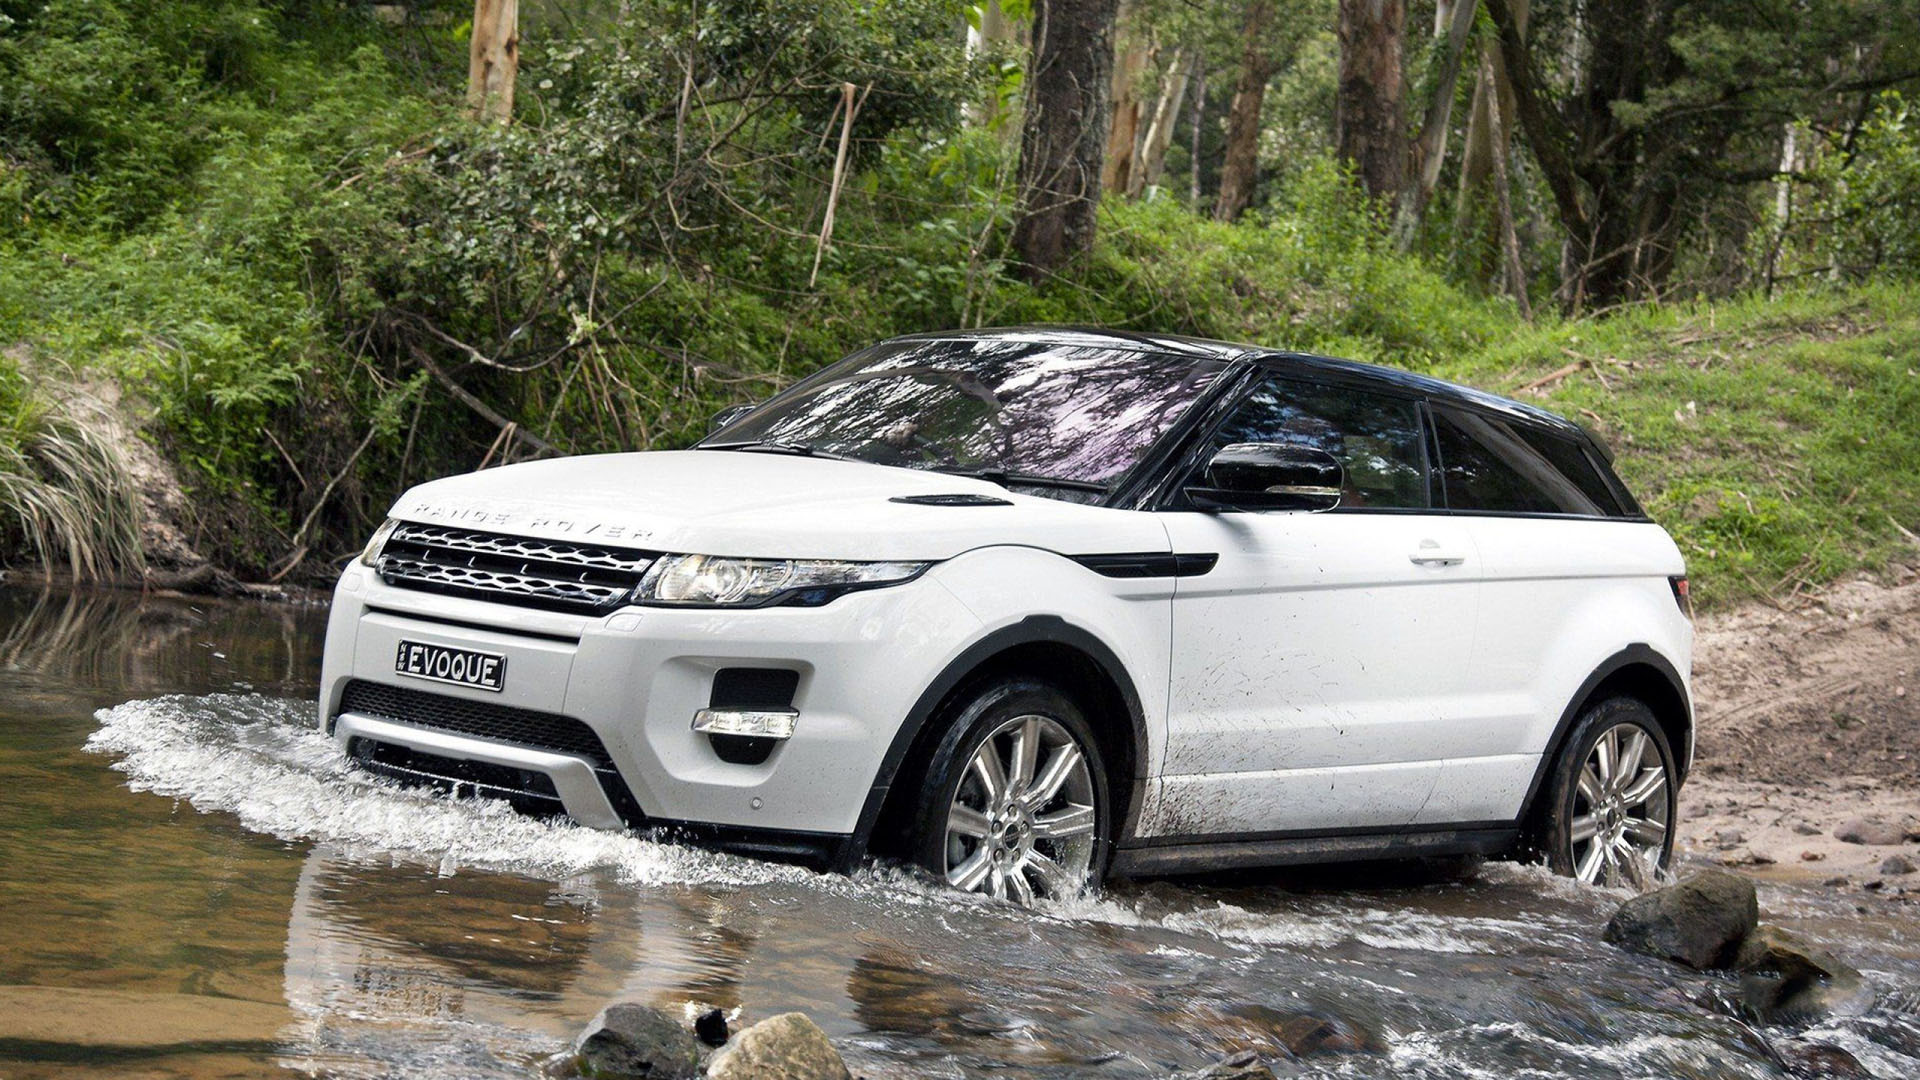 Range Rover Sport Wallpaper Image Collections Of